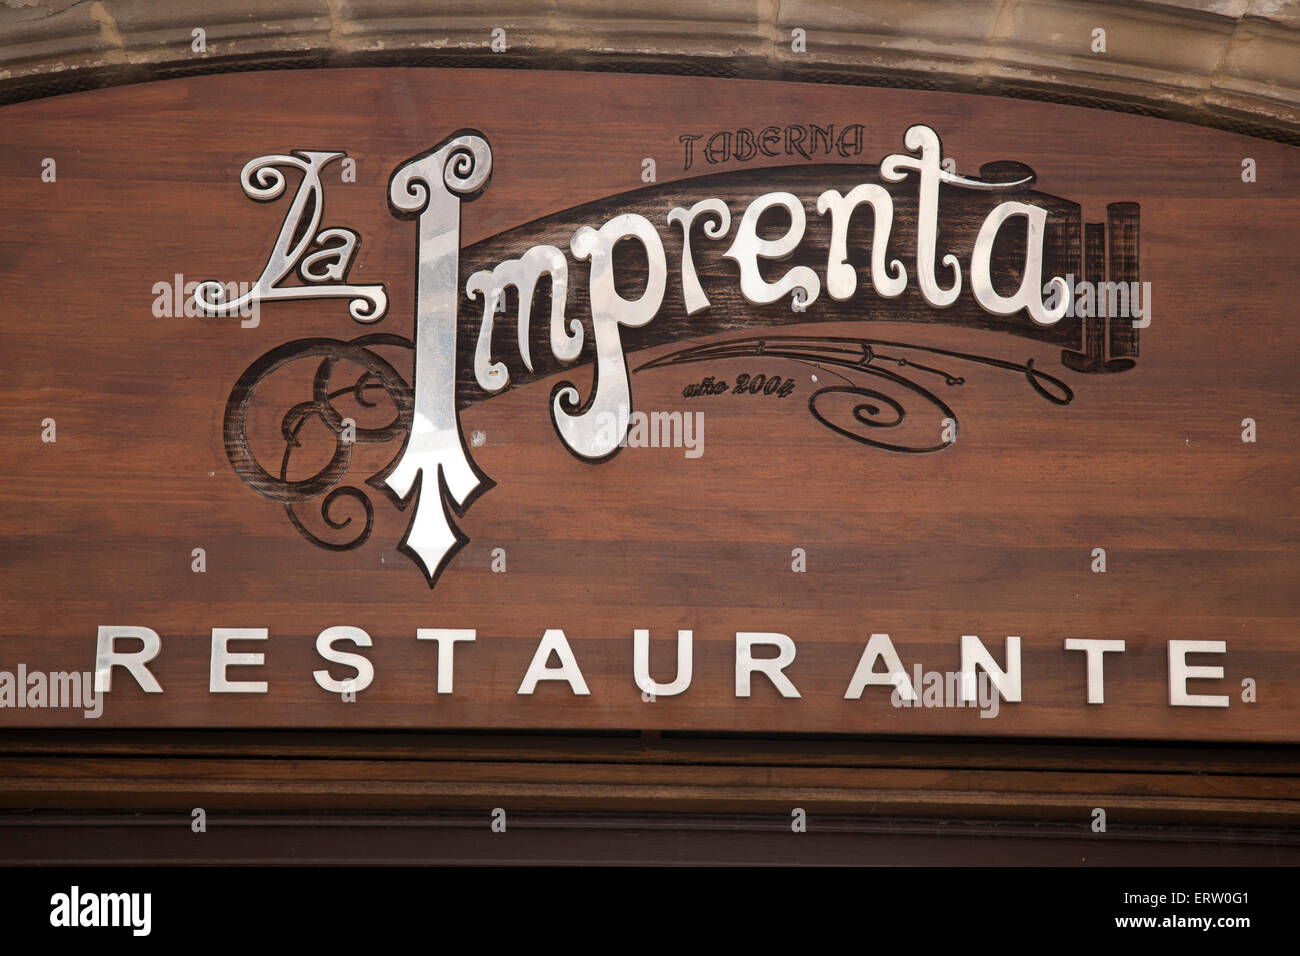 Imprenta Restaurant, Cafe and Bar, Sign, Ubeda, Andalusia, Spain Stock Photo